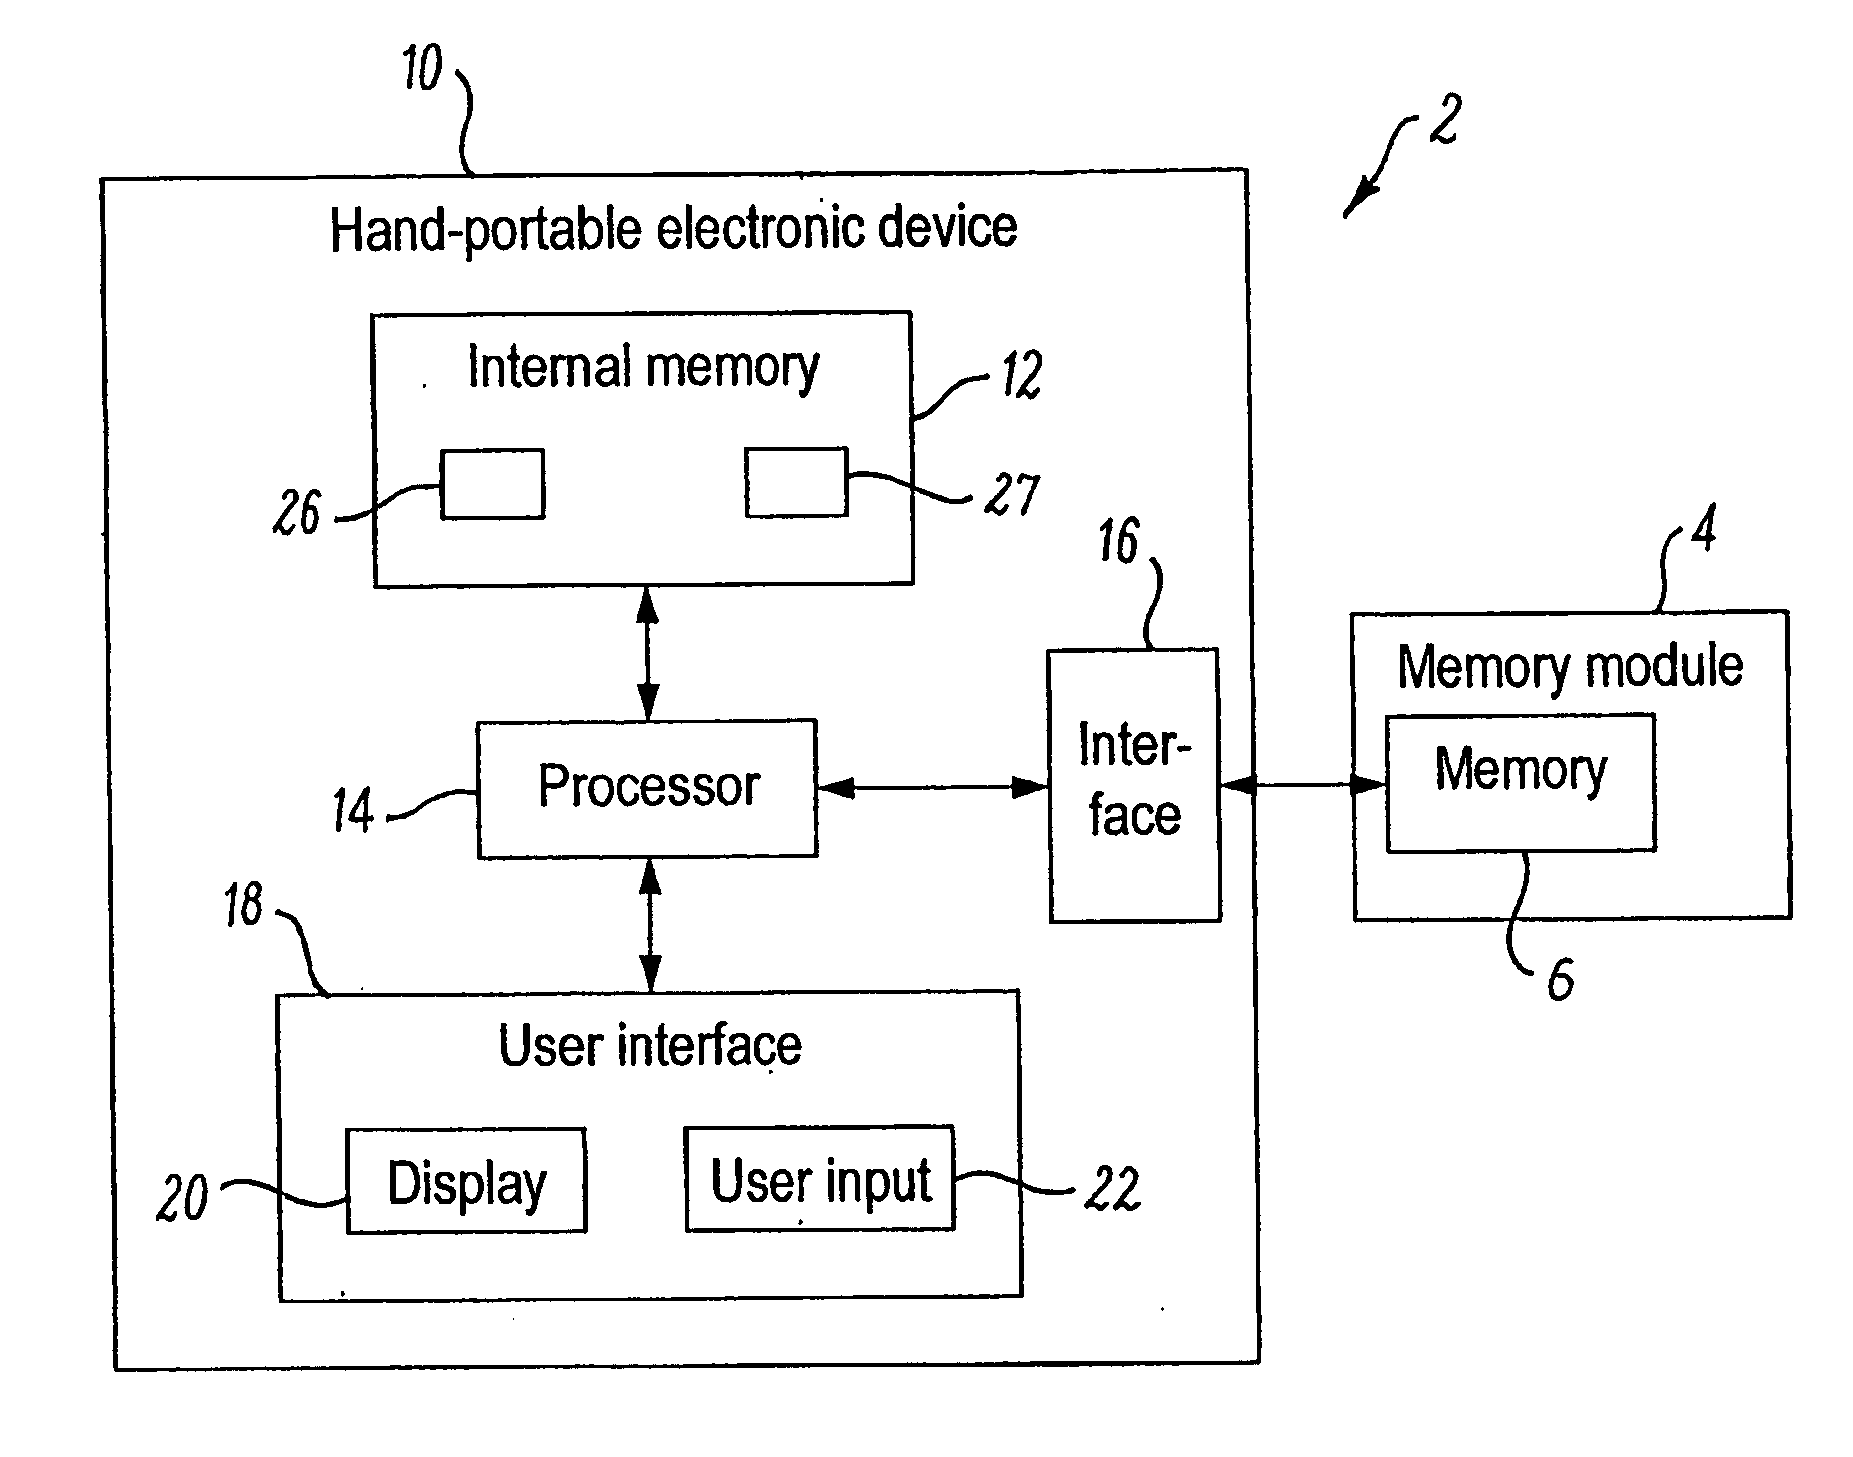 Hardware-Initiated Automated Back-Up of Data from an Internal Memory of a Hand-Portable Electronic Device